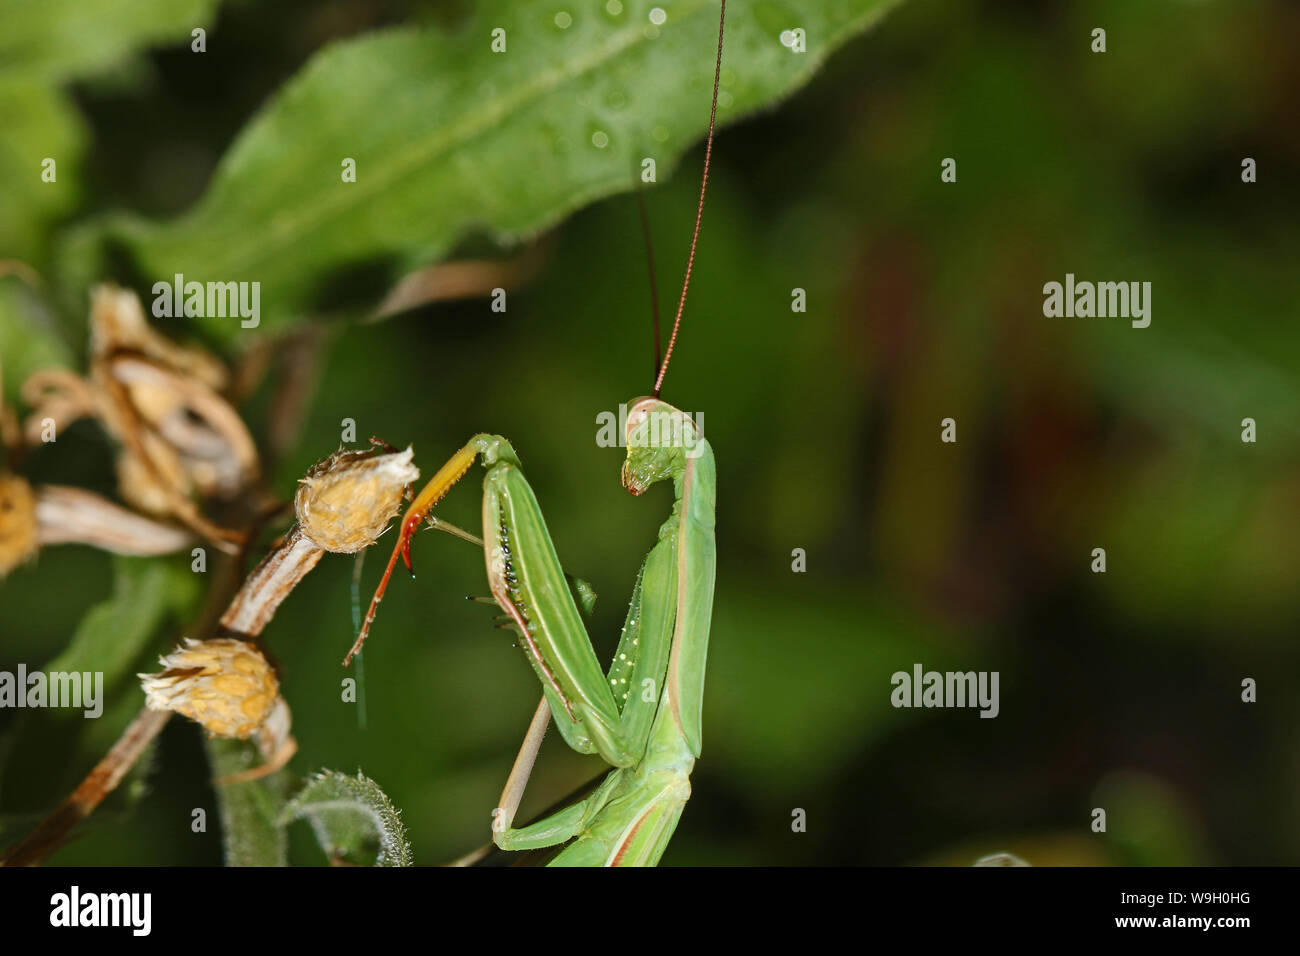 Green European Praying Mantis Or Mantid Latin Mantis Religiosa On A Wild Flower In Summer In Italy State Symbol Or Animal Of Connecticut Stock Photo Alamy